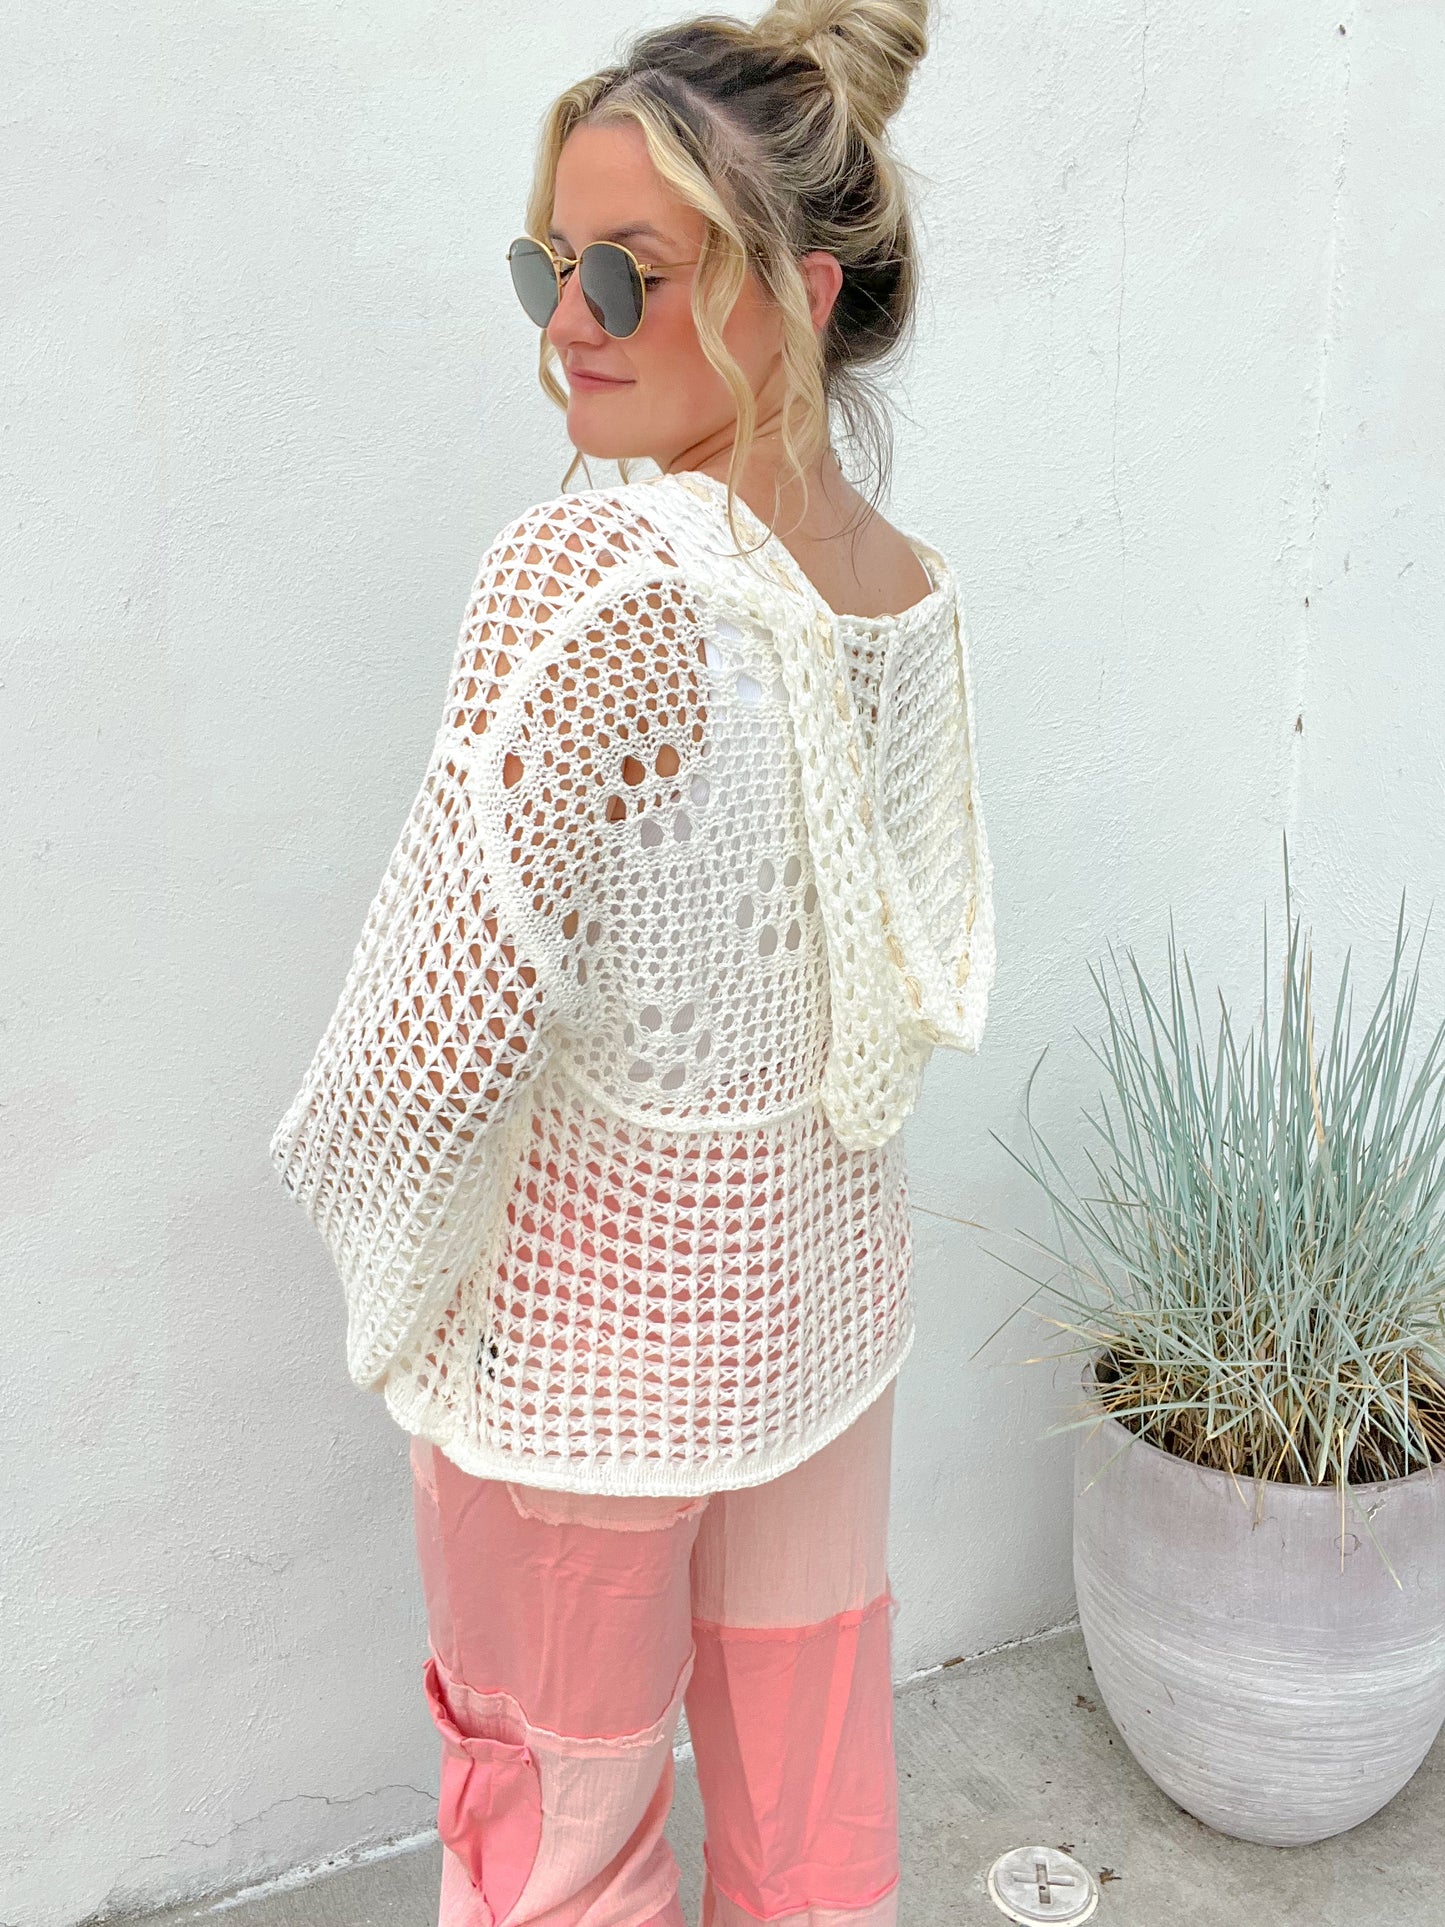 The Florence Crochet Hoodie